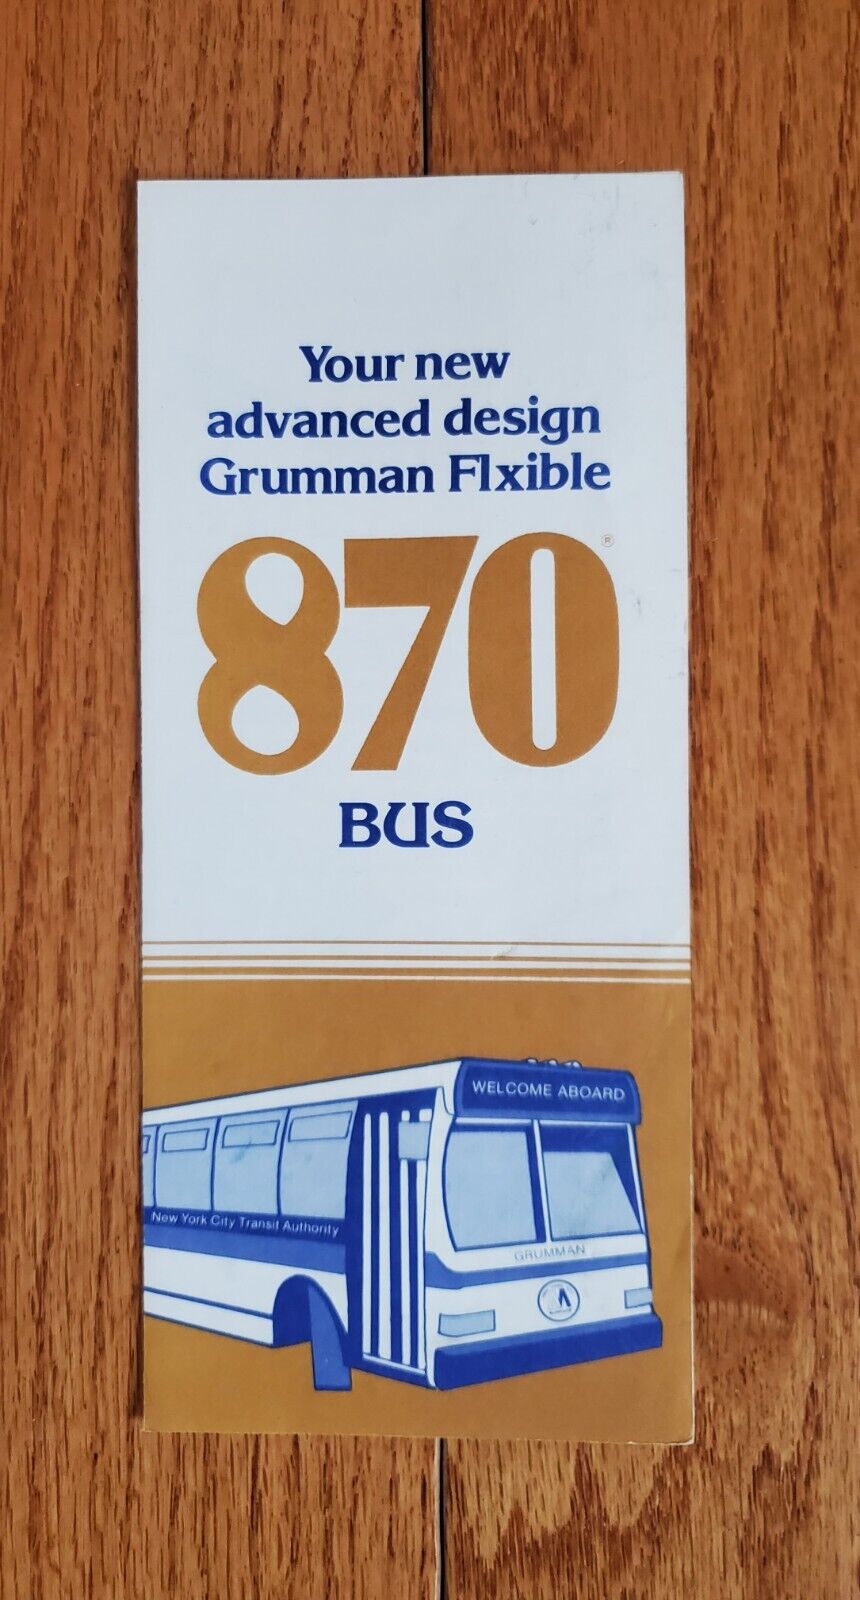 VINTAGE NYCTA GRUMMAN FLXIBLE 870 BUS NEW DESIGN BROCHURE PAMPHLET NYC BUS